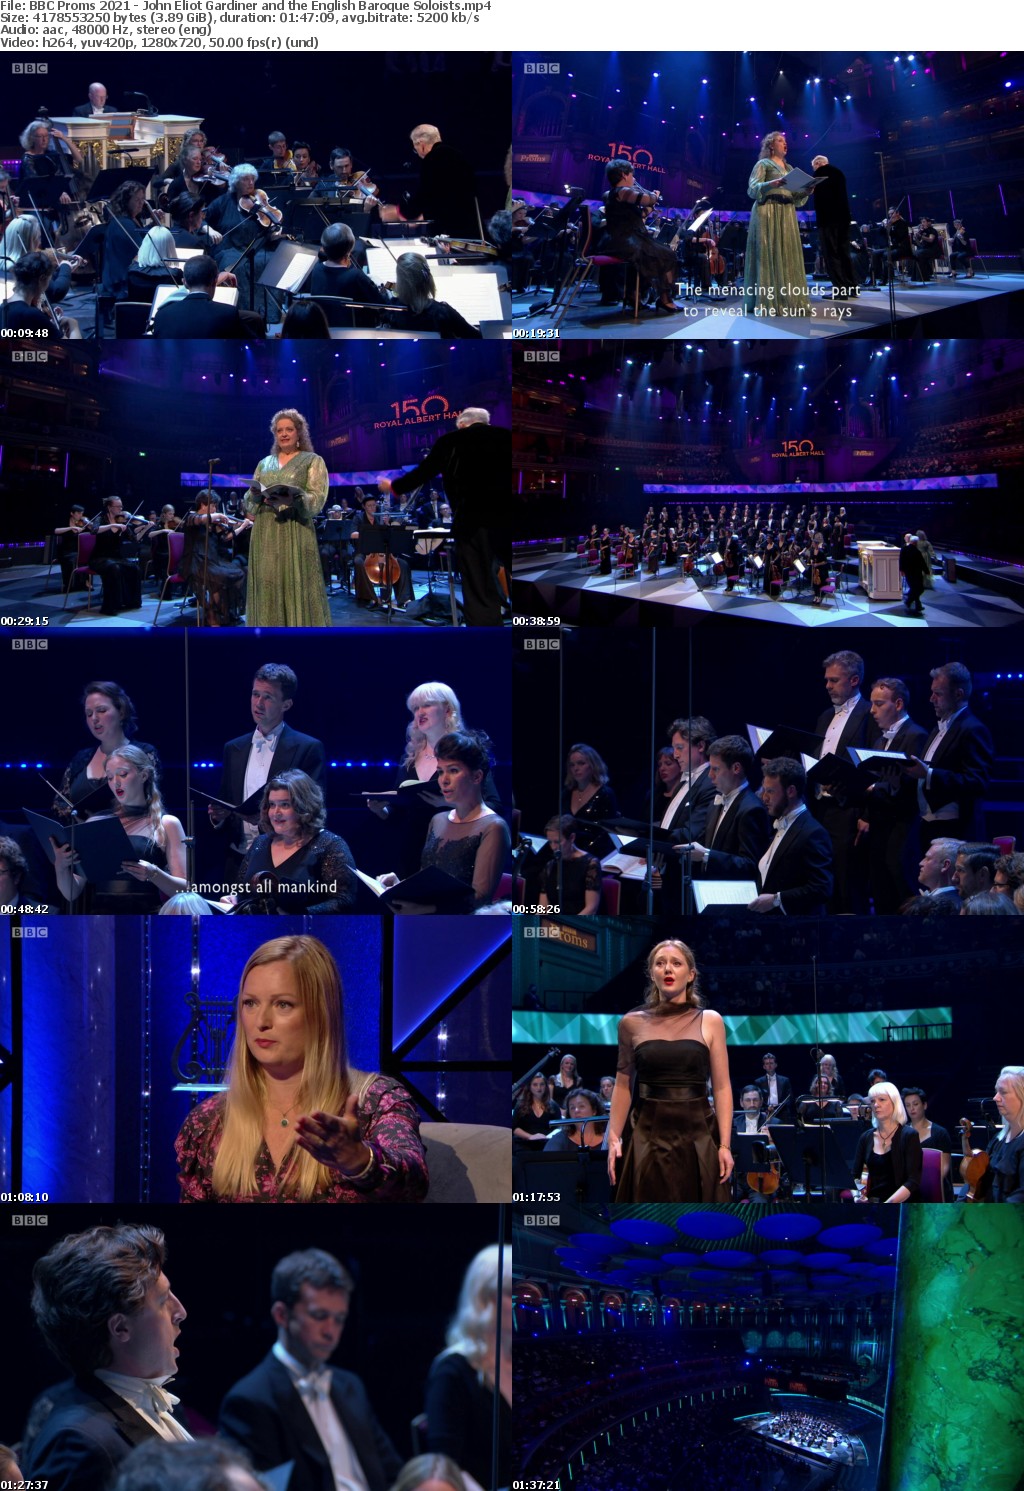 BBC Proms 2021 - John Eliot Gardiner and the English Baroque Soloists (1280x720p HD, 50fps, soft Eng subs)